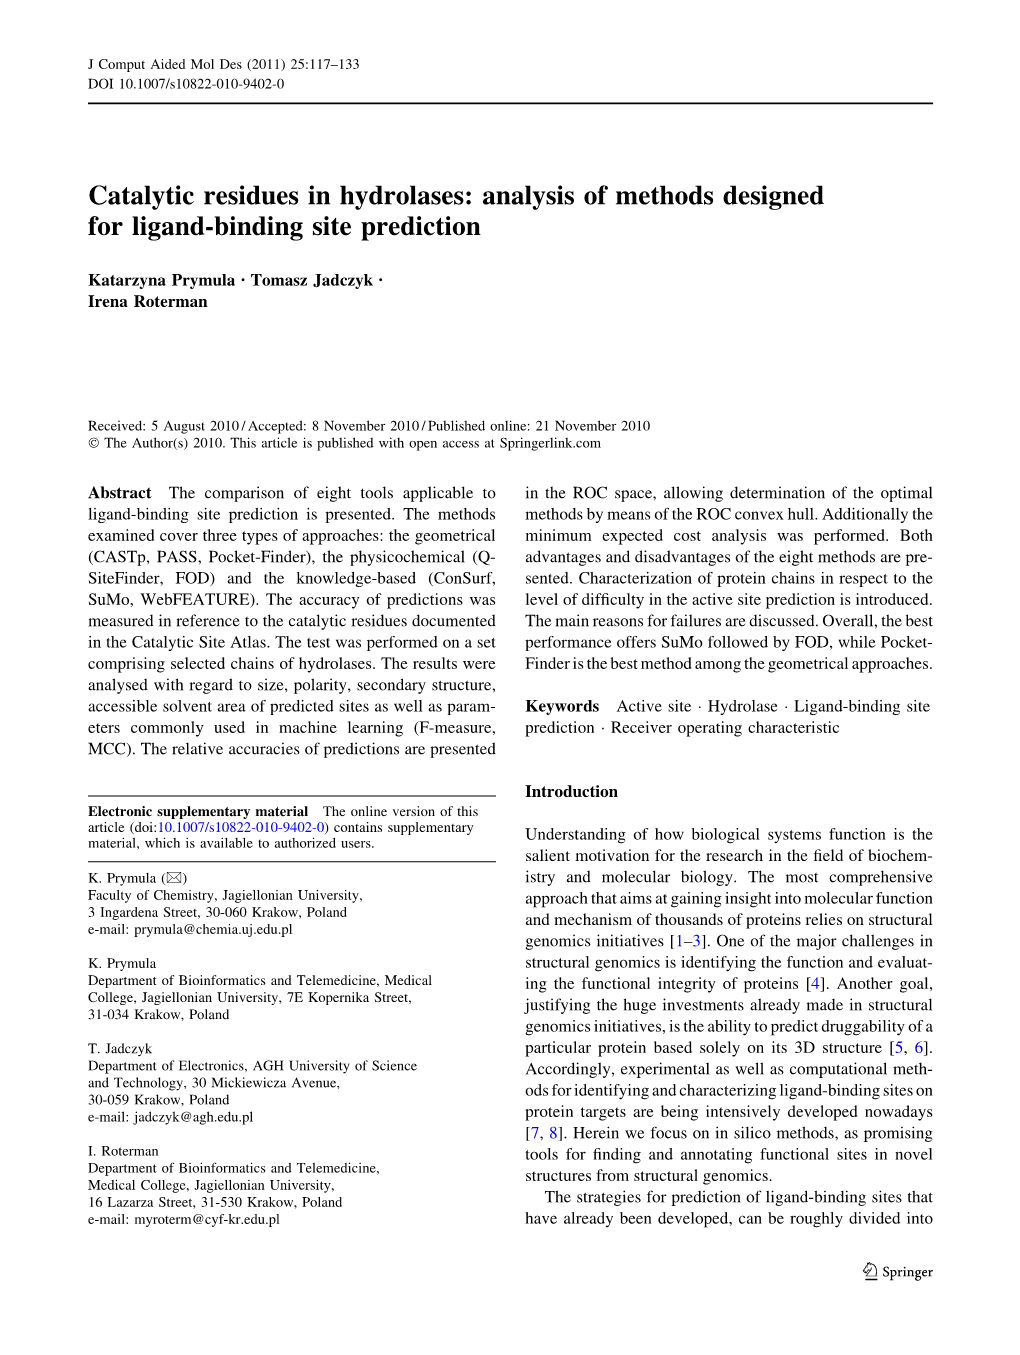 Catalytic Residues in Hydrolases: Analysis of Methods Designed for Ligand-Binding Site Prediction